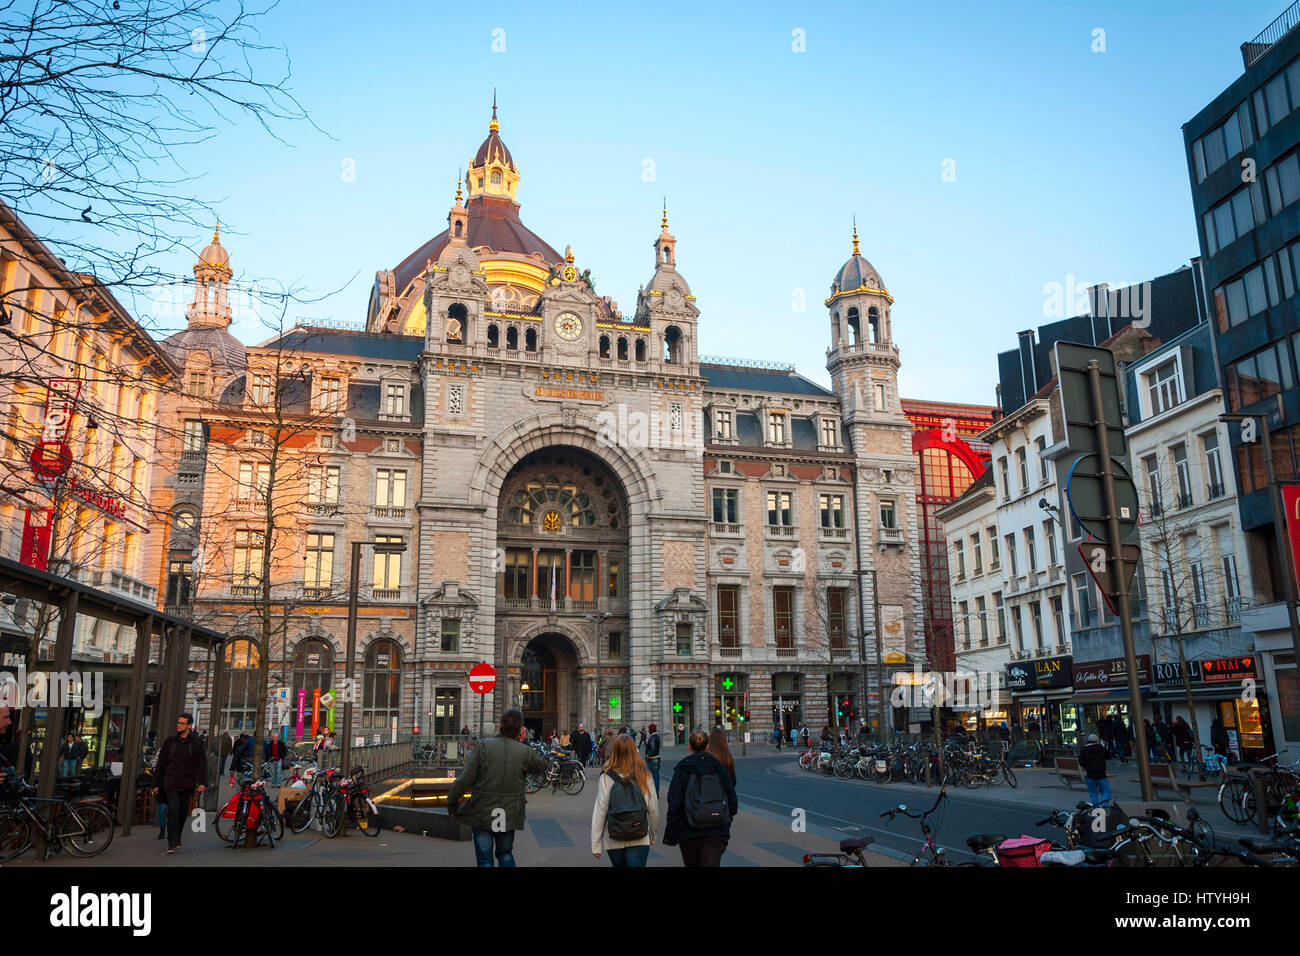 ANTWERP, BELGIUM - MARCH 17:  The exterior of Antwerp central train station on March 17, 2015 Stock Photo